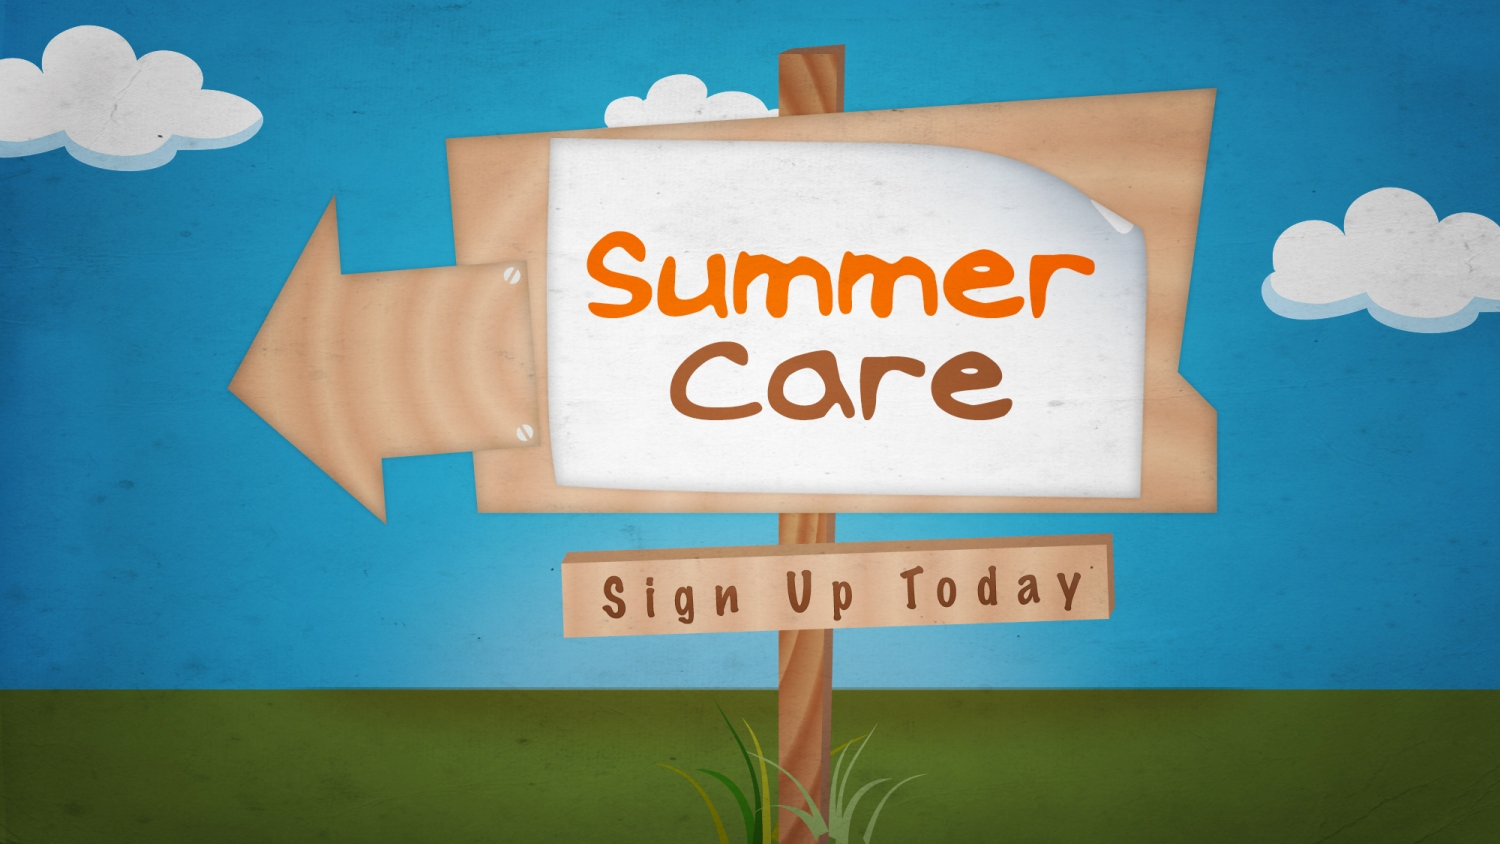 Summer Care Opportunity